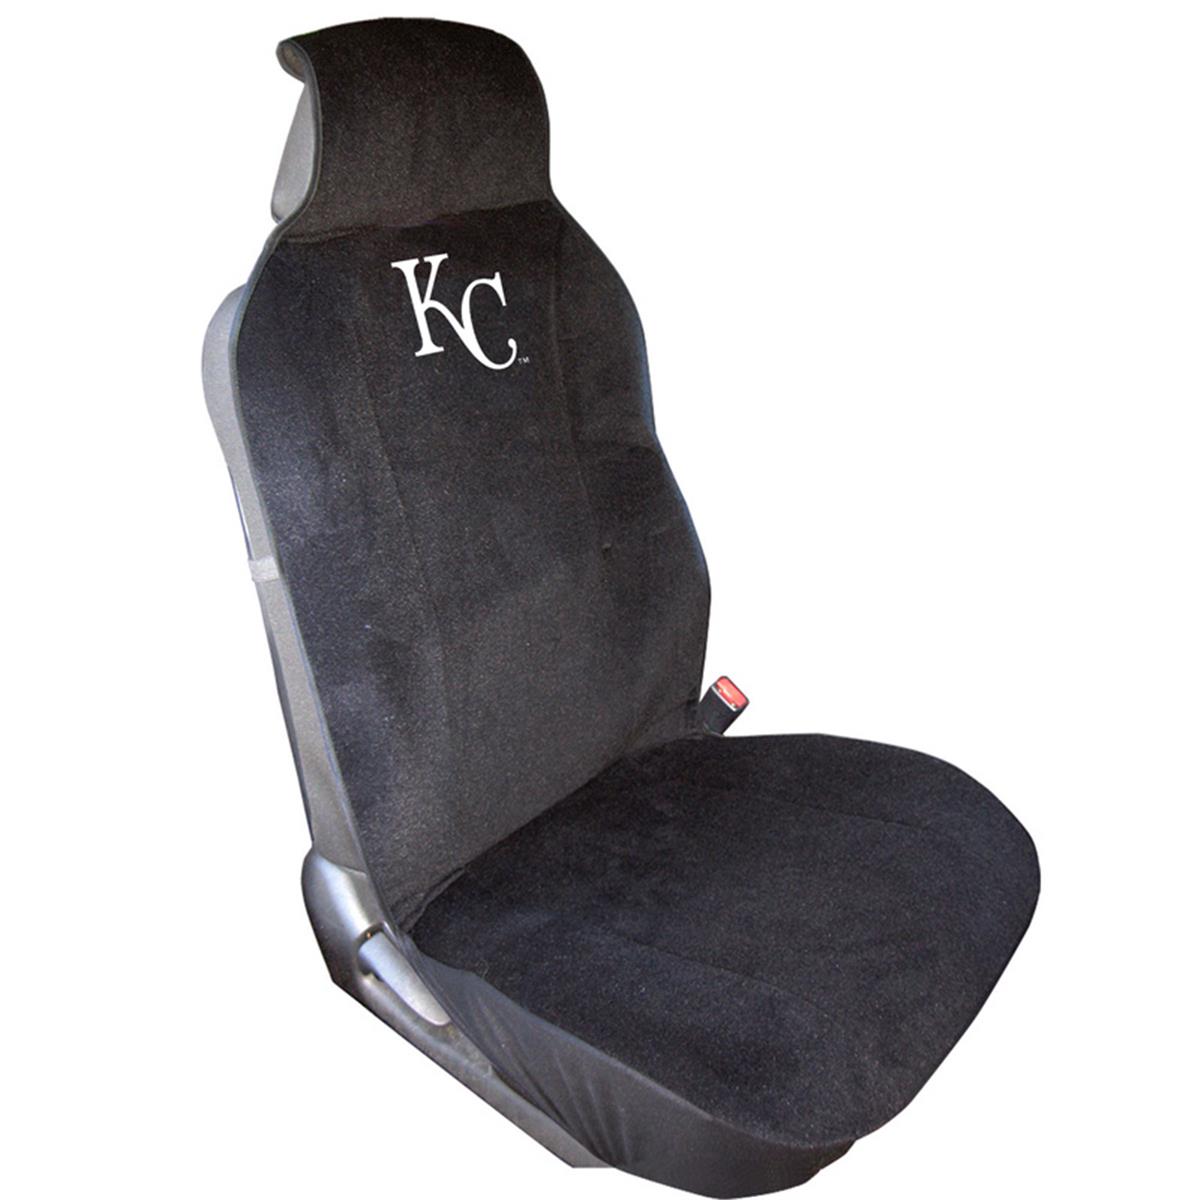 Picture of Fremont Die 2324566807 MLB Kansas City Royals Seat Cover